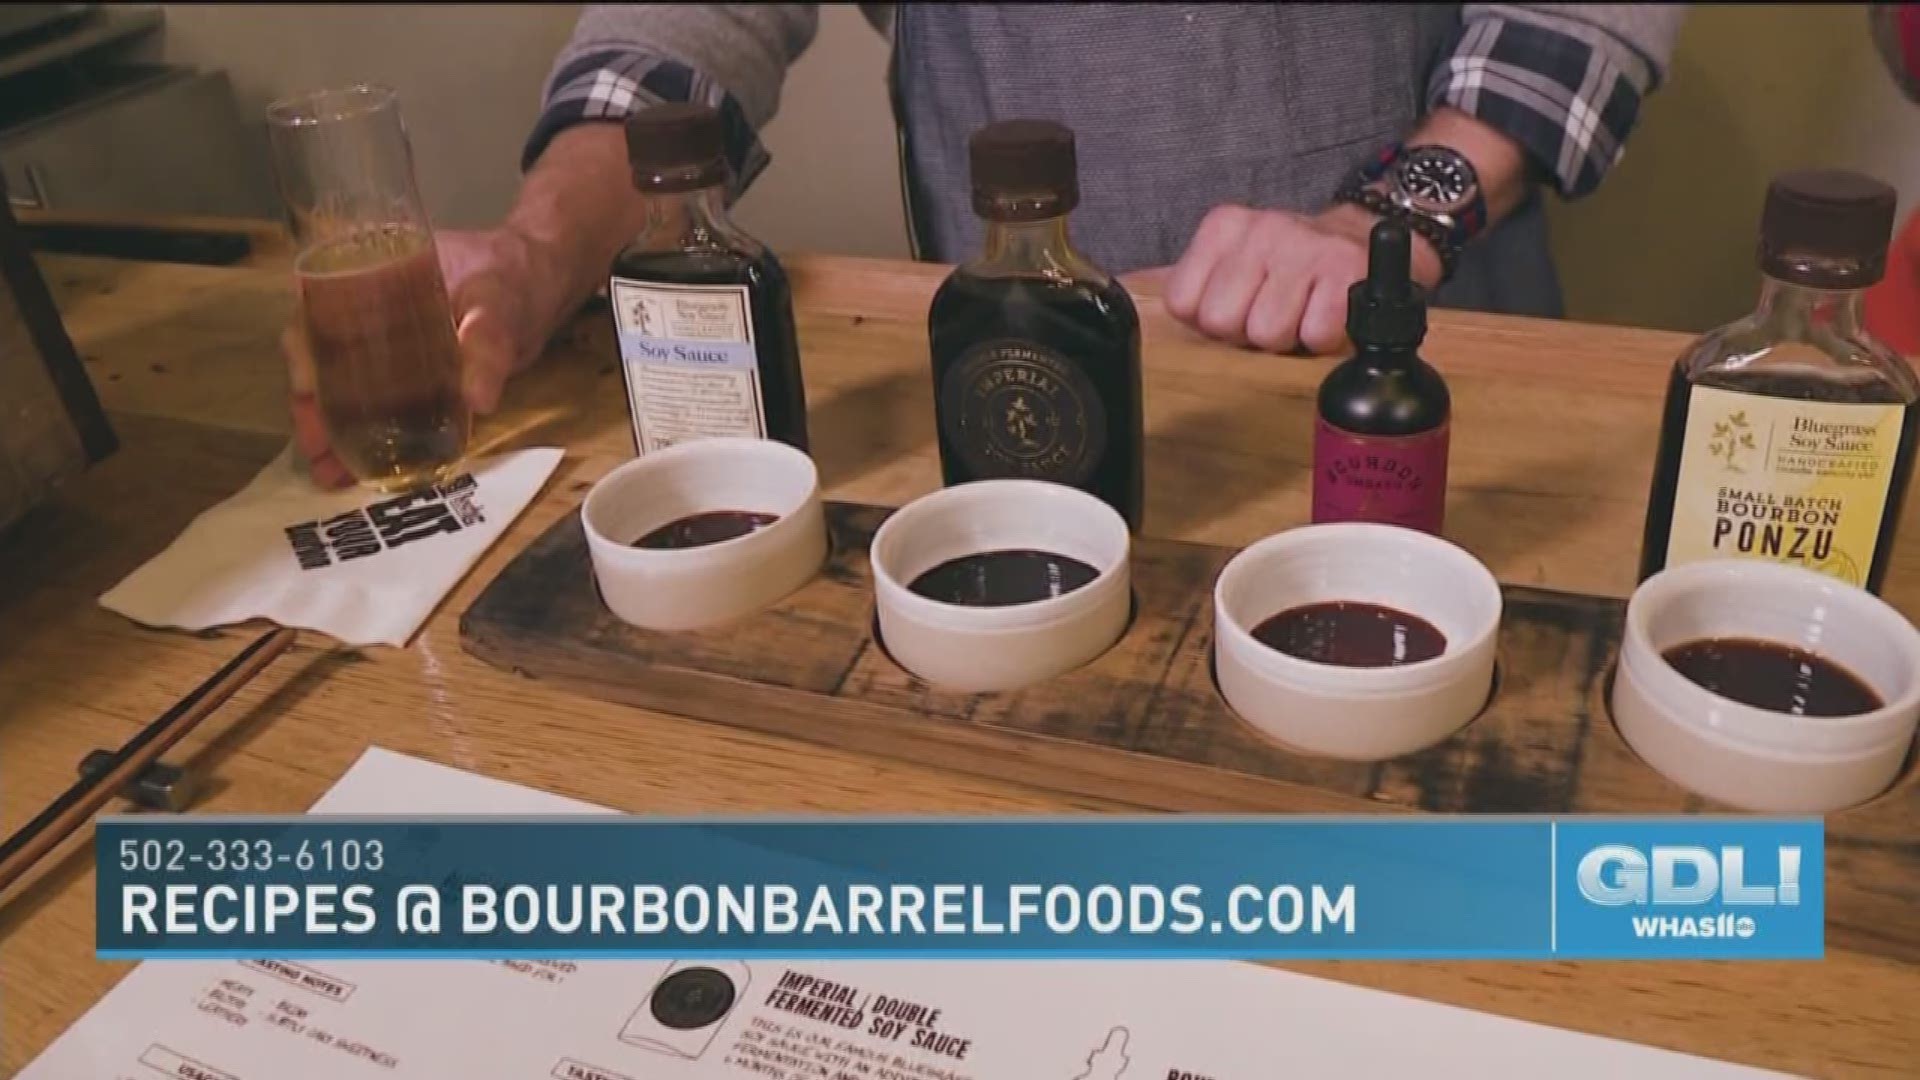 Bourbon Barrel Foods is located at 1201 Story Avenue in Louisville, KY.